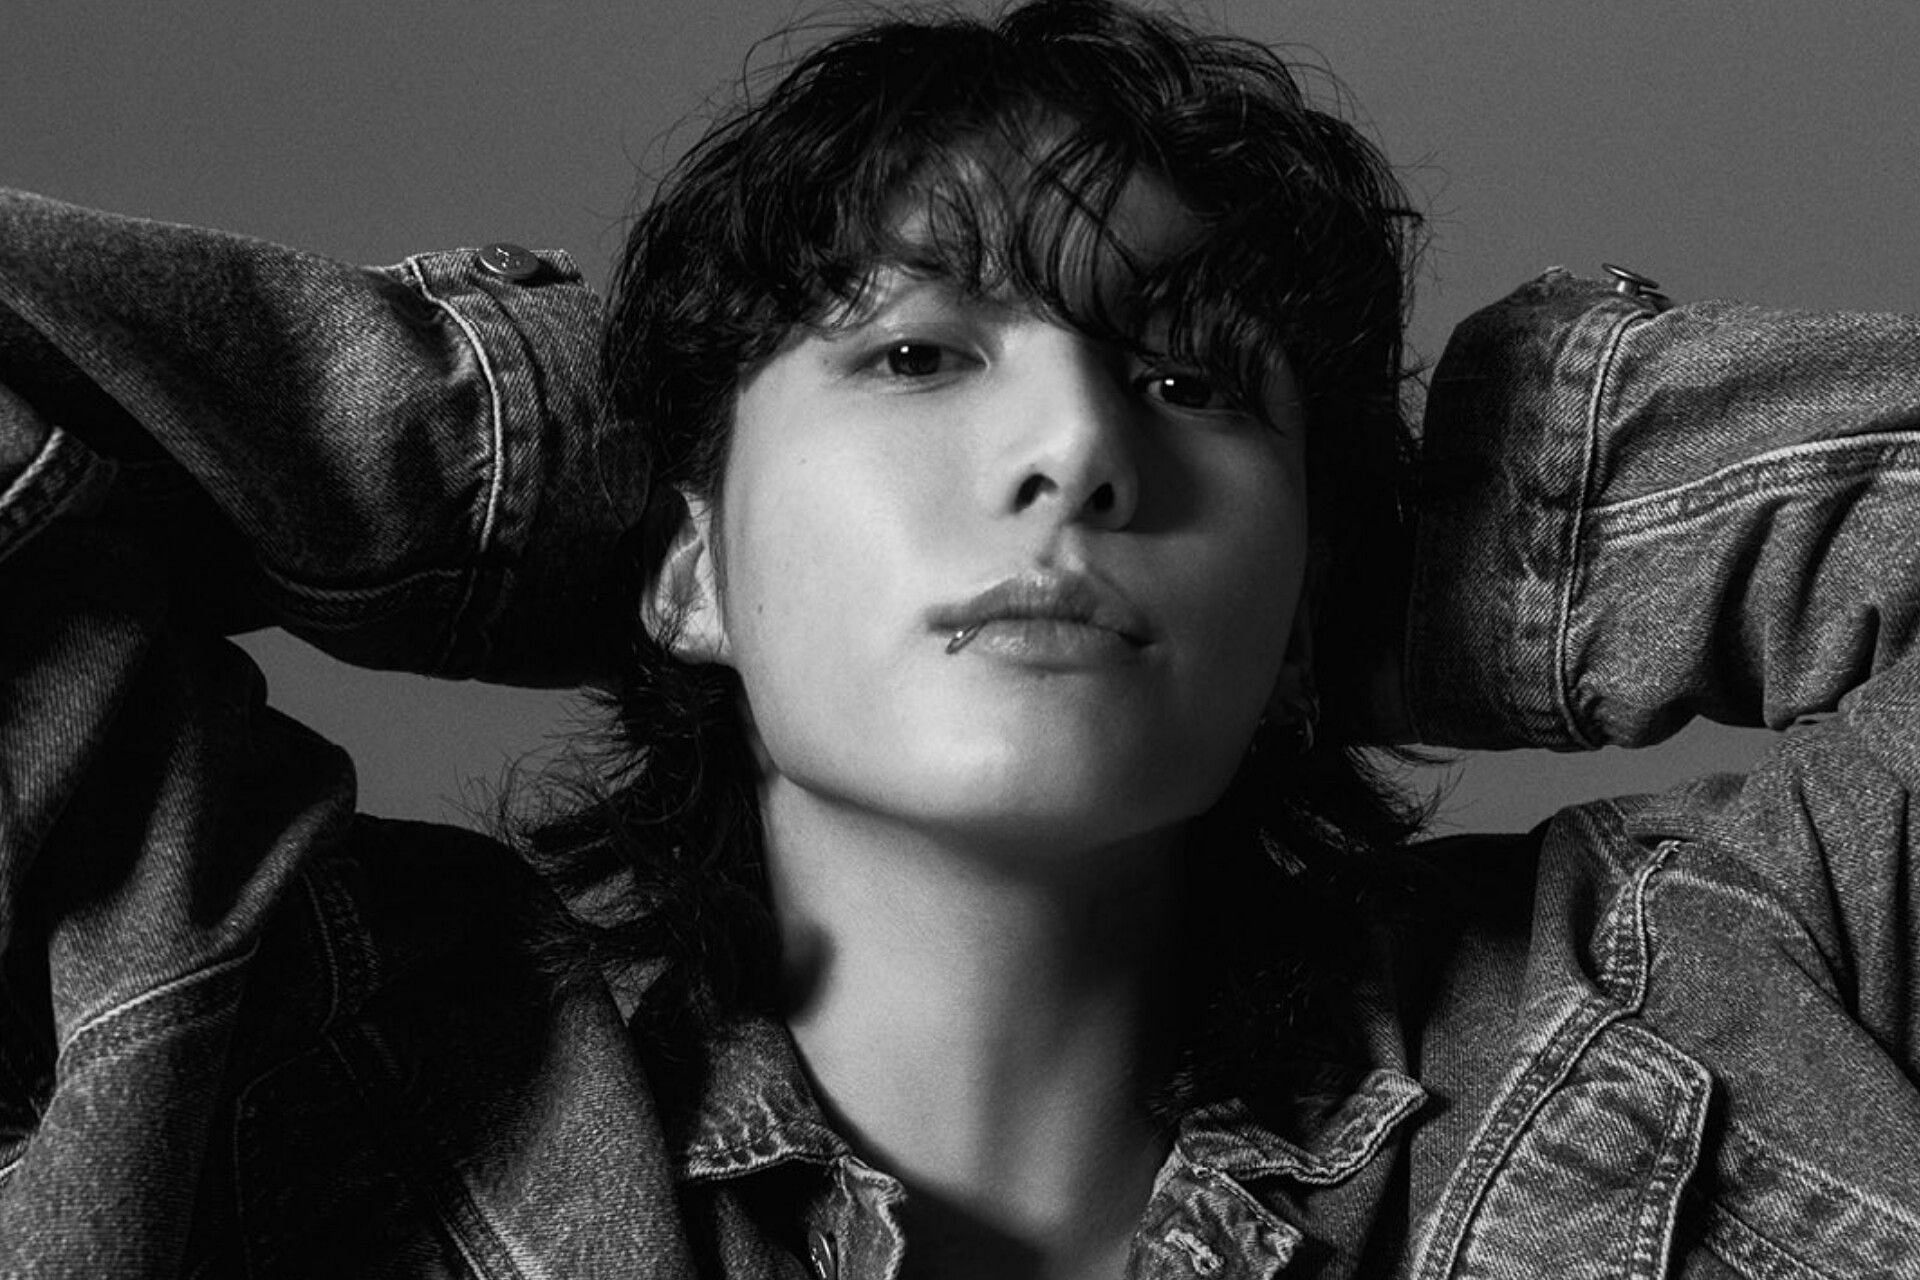 Backup dancer on BTS&rsquo; Jungkook&rsquo;s &lsquo;Standing Next To You&rsquo; shares a video on how the singer recorded his mistake to tease him (Image via @calvinklein/X)